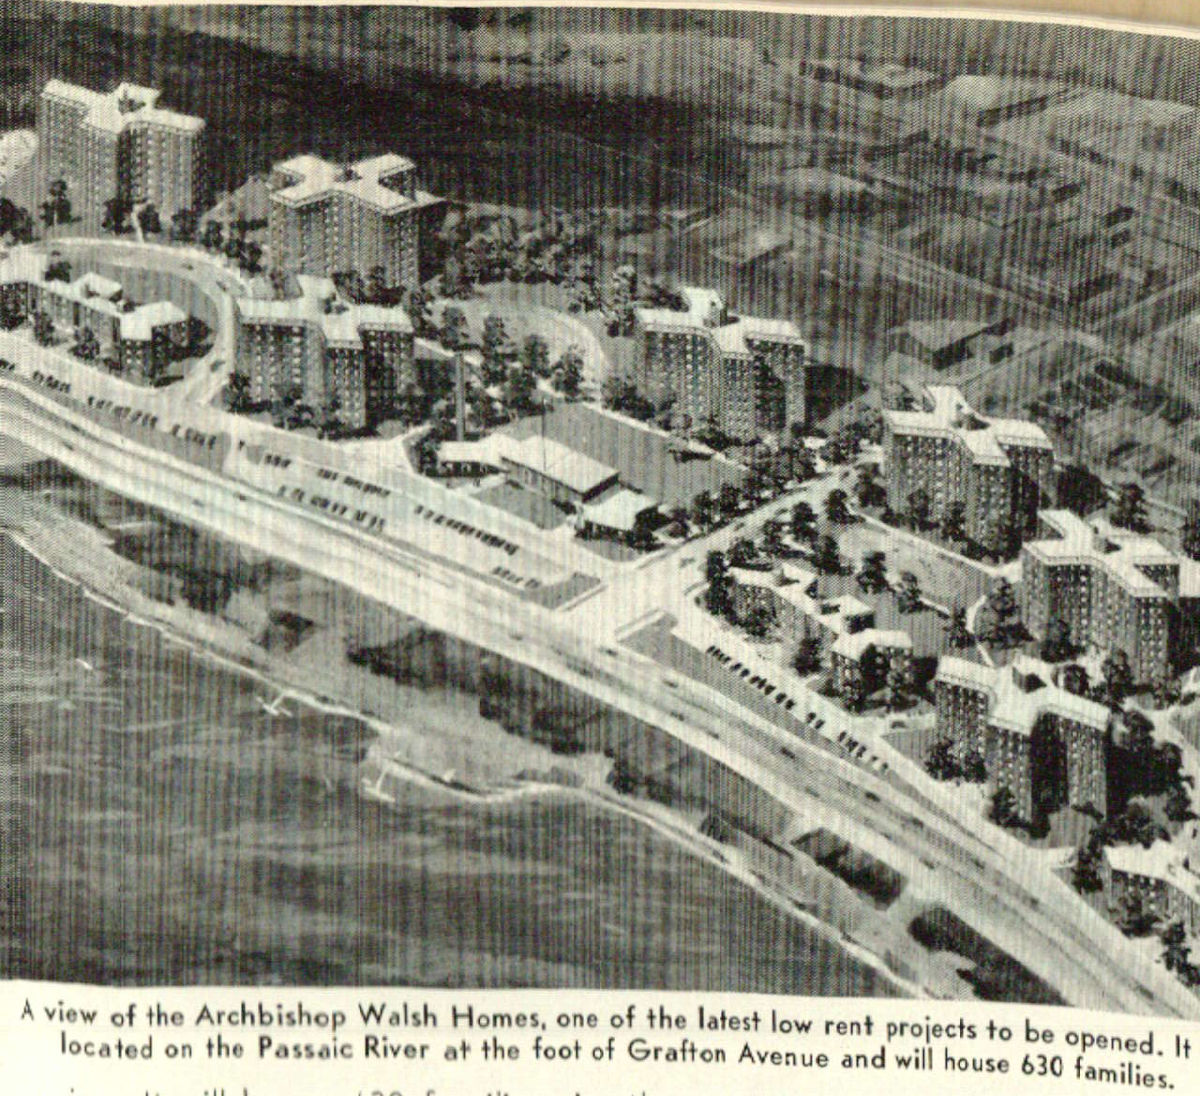 1953 Drawing
Photo from the Newark Municipal Yearbook 1953
